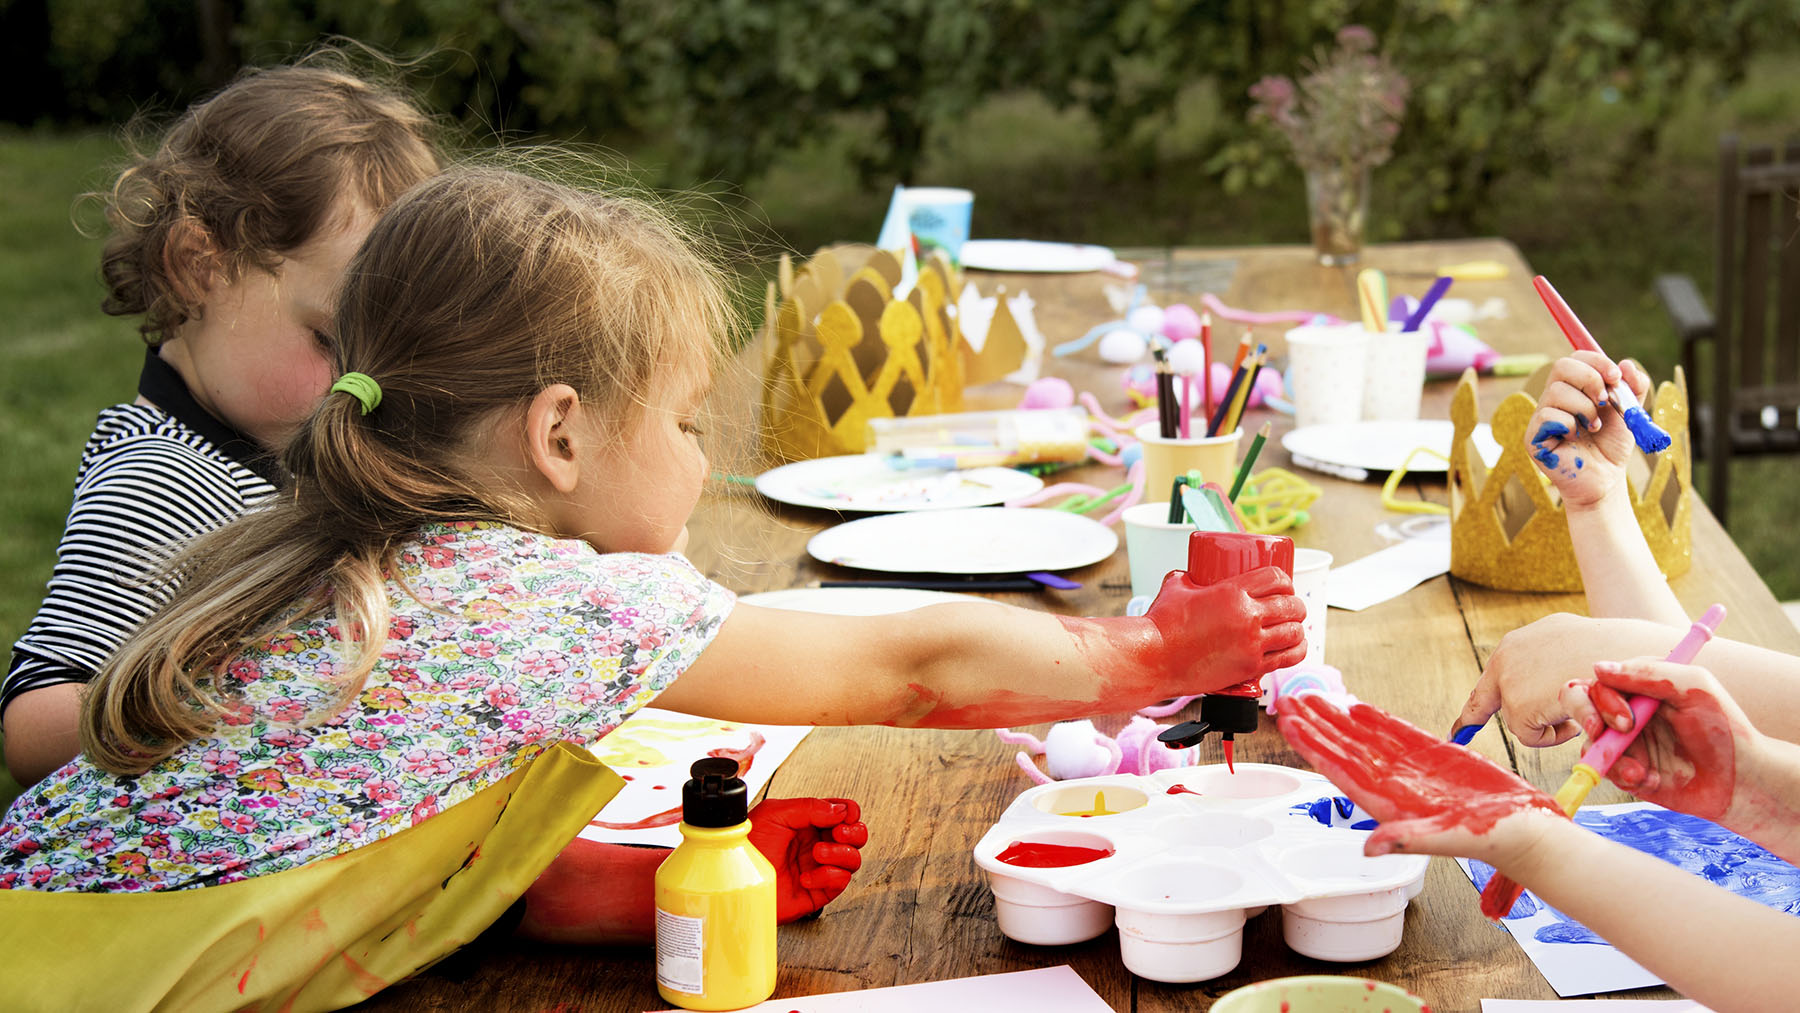 Stock photo of kids doing crafts outdoors (Image by RawPixel.com)